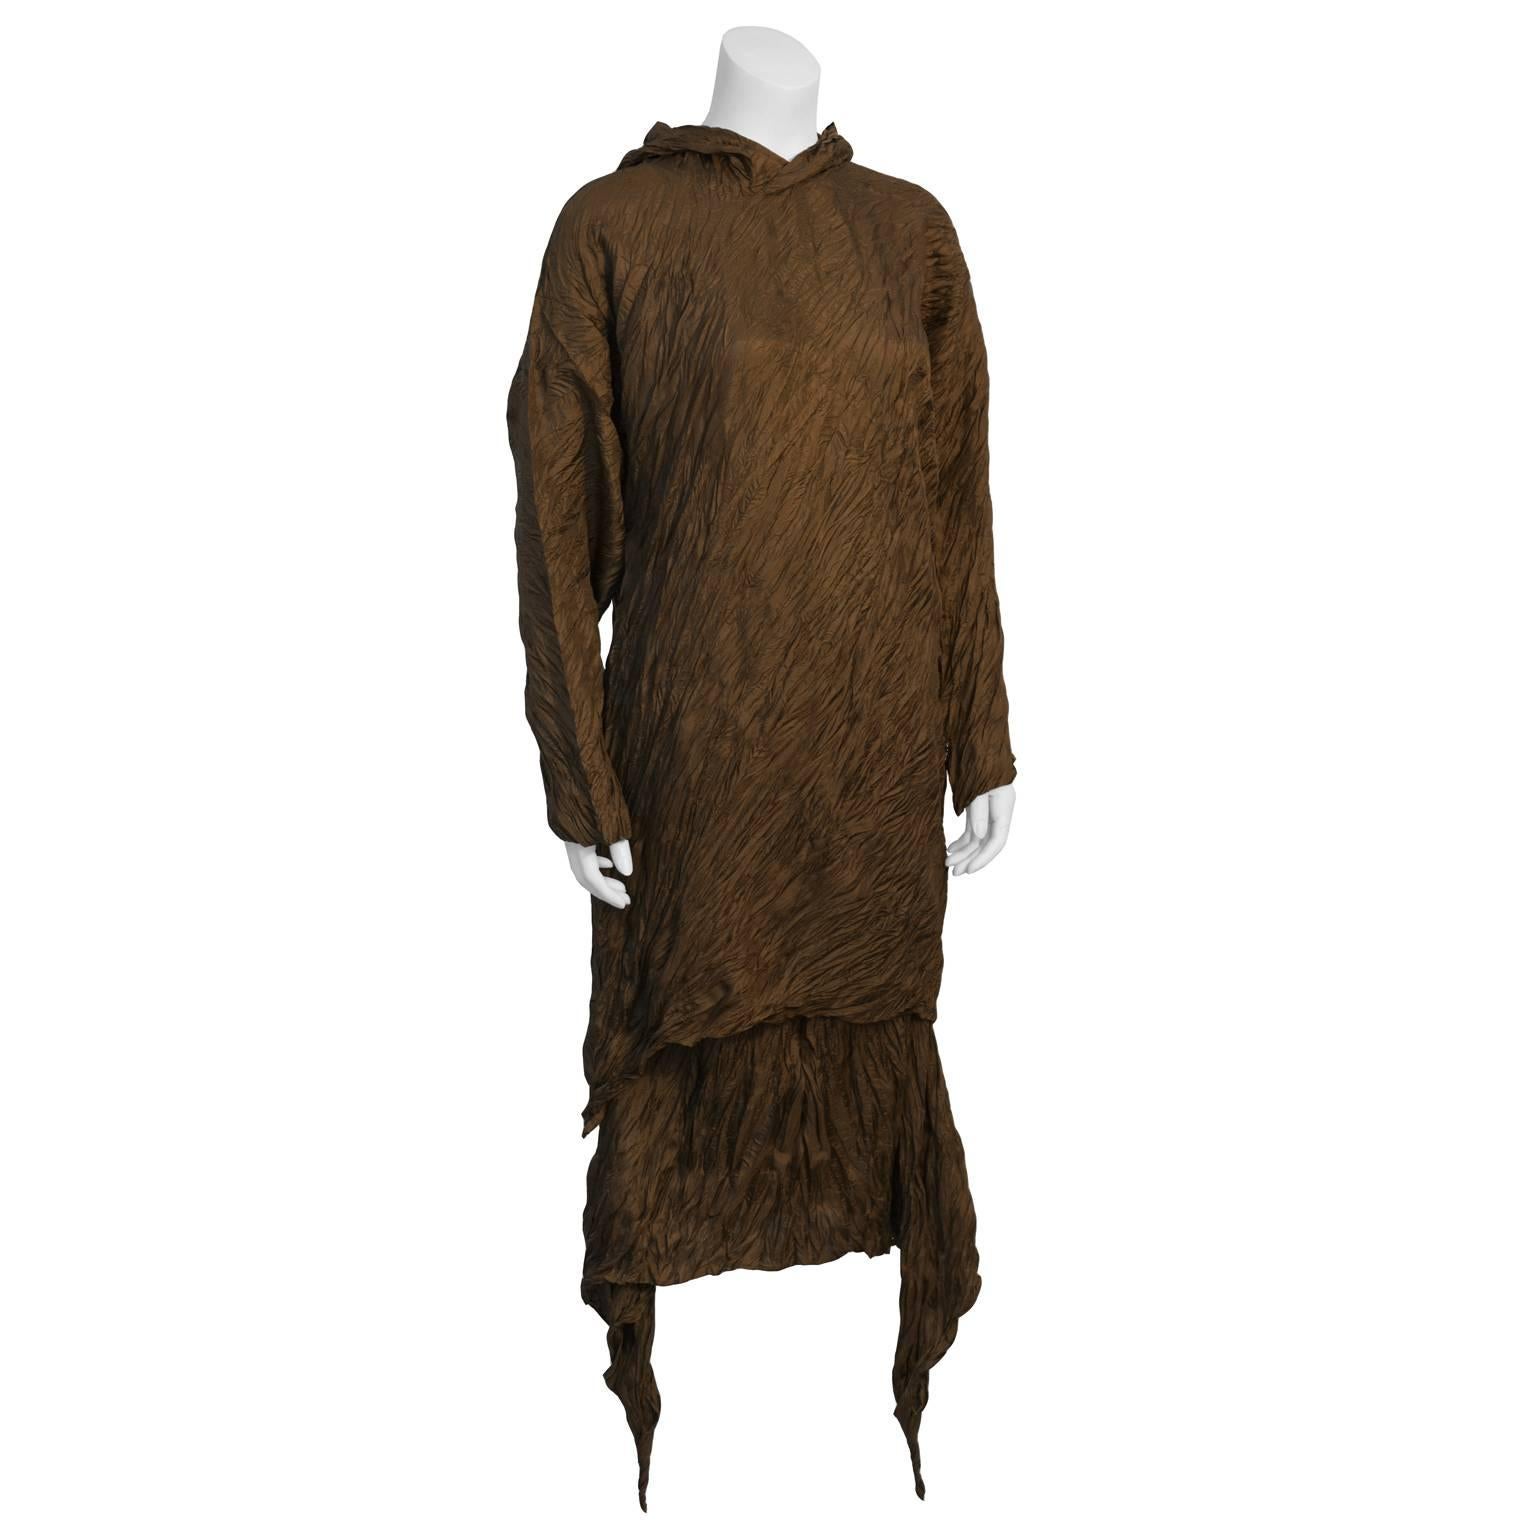 Amazing Issey Miyake brown signature crinkled polyester top and skirt duo from the 1980's. Crinkled long sleeve pullover is tunic length with a pointed hood. Mid length skirt has elasticized waist and hanging hanky hems that can be tied or left to